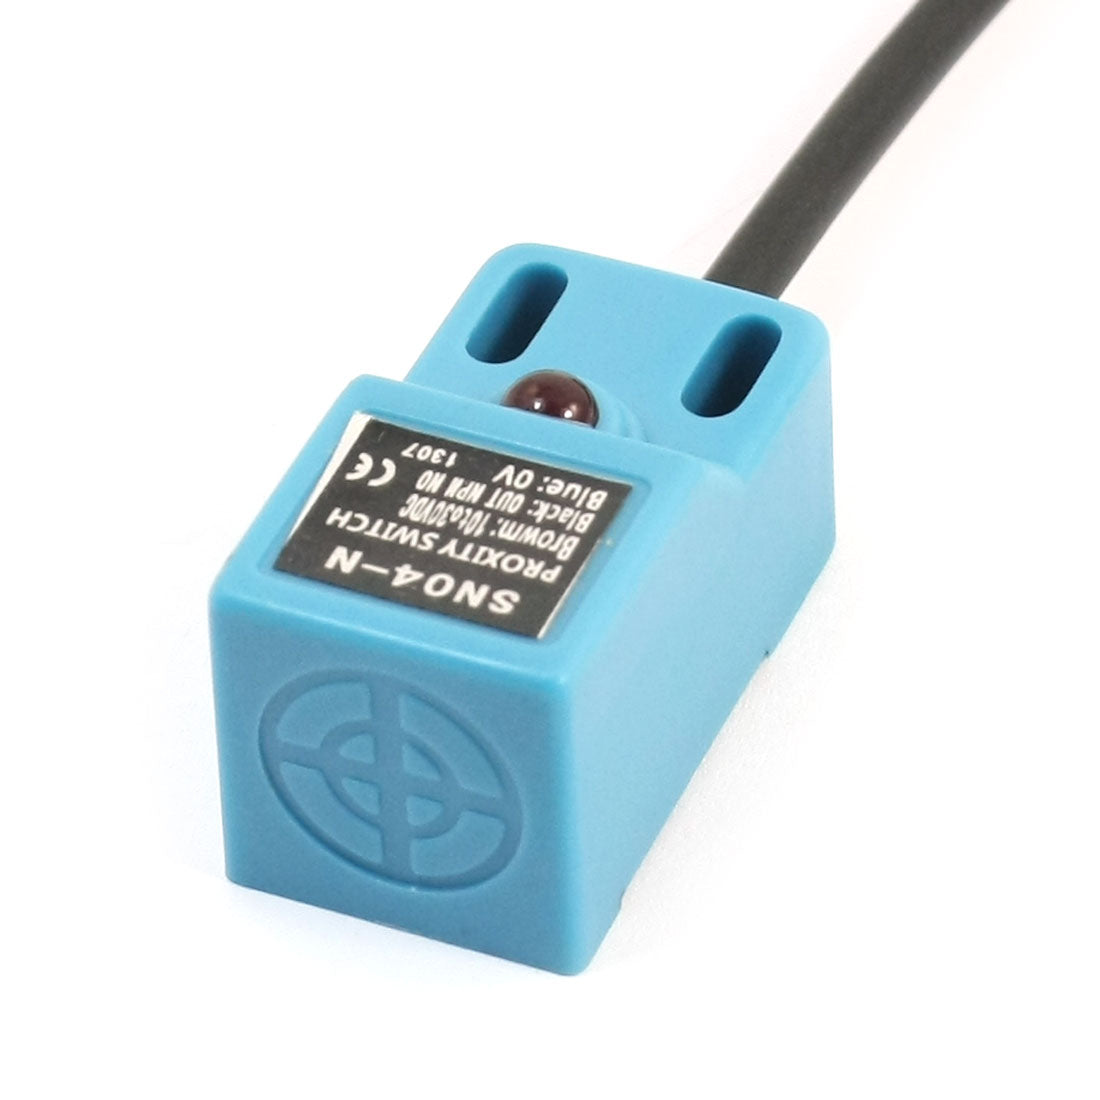 uxcell Uxcell SN04-N 3-Wire NPN NO 4mm Approach Detect Inductive Sensor Proximity Switch DC 10-30V 200 mA